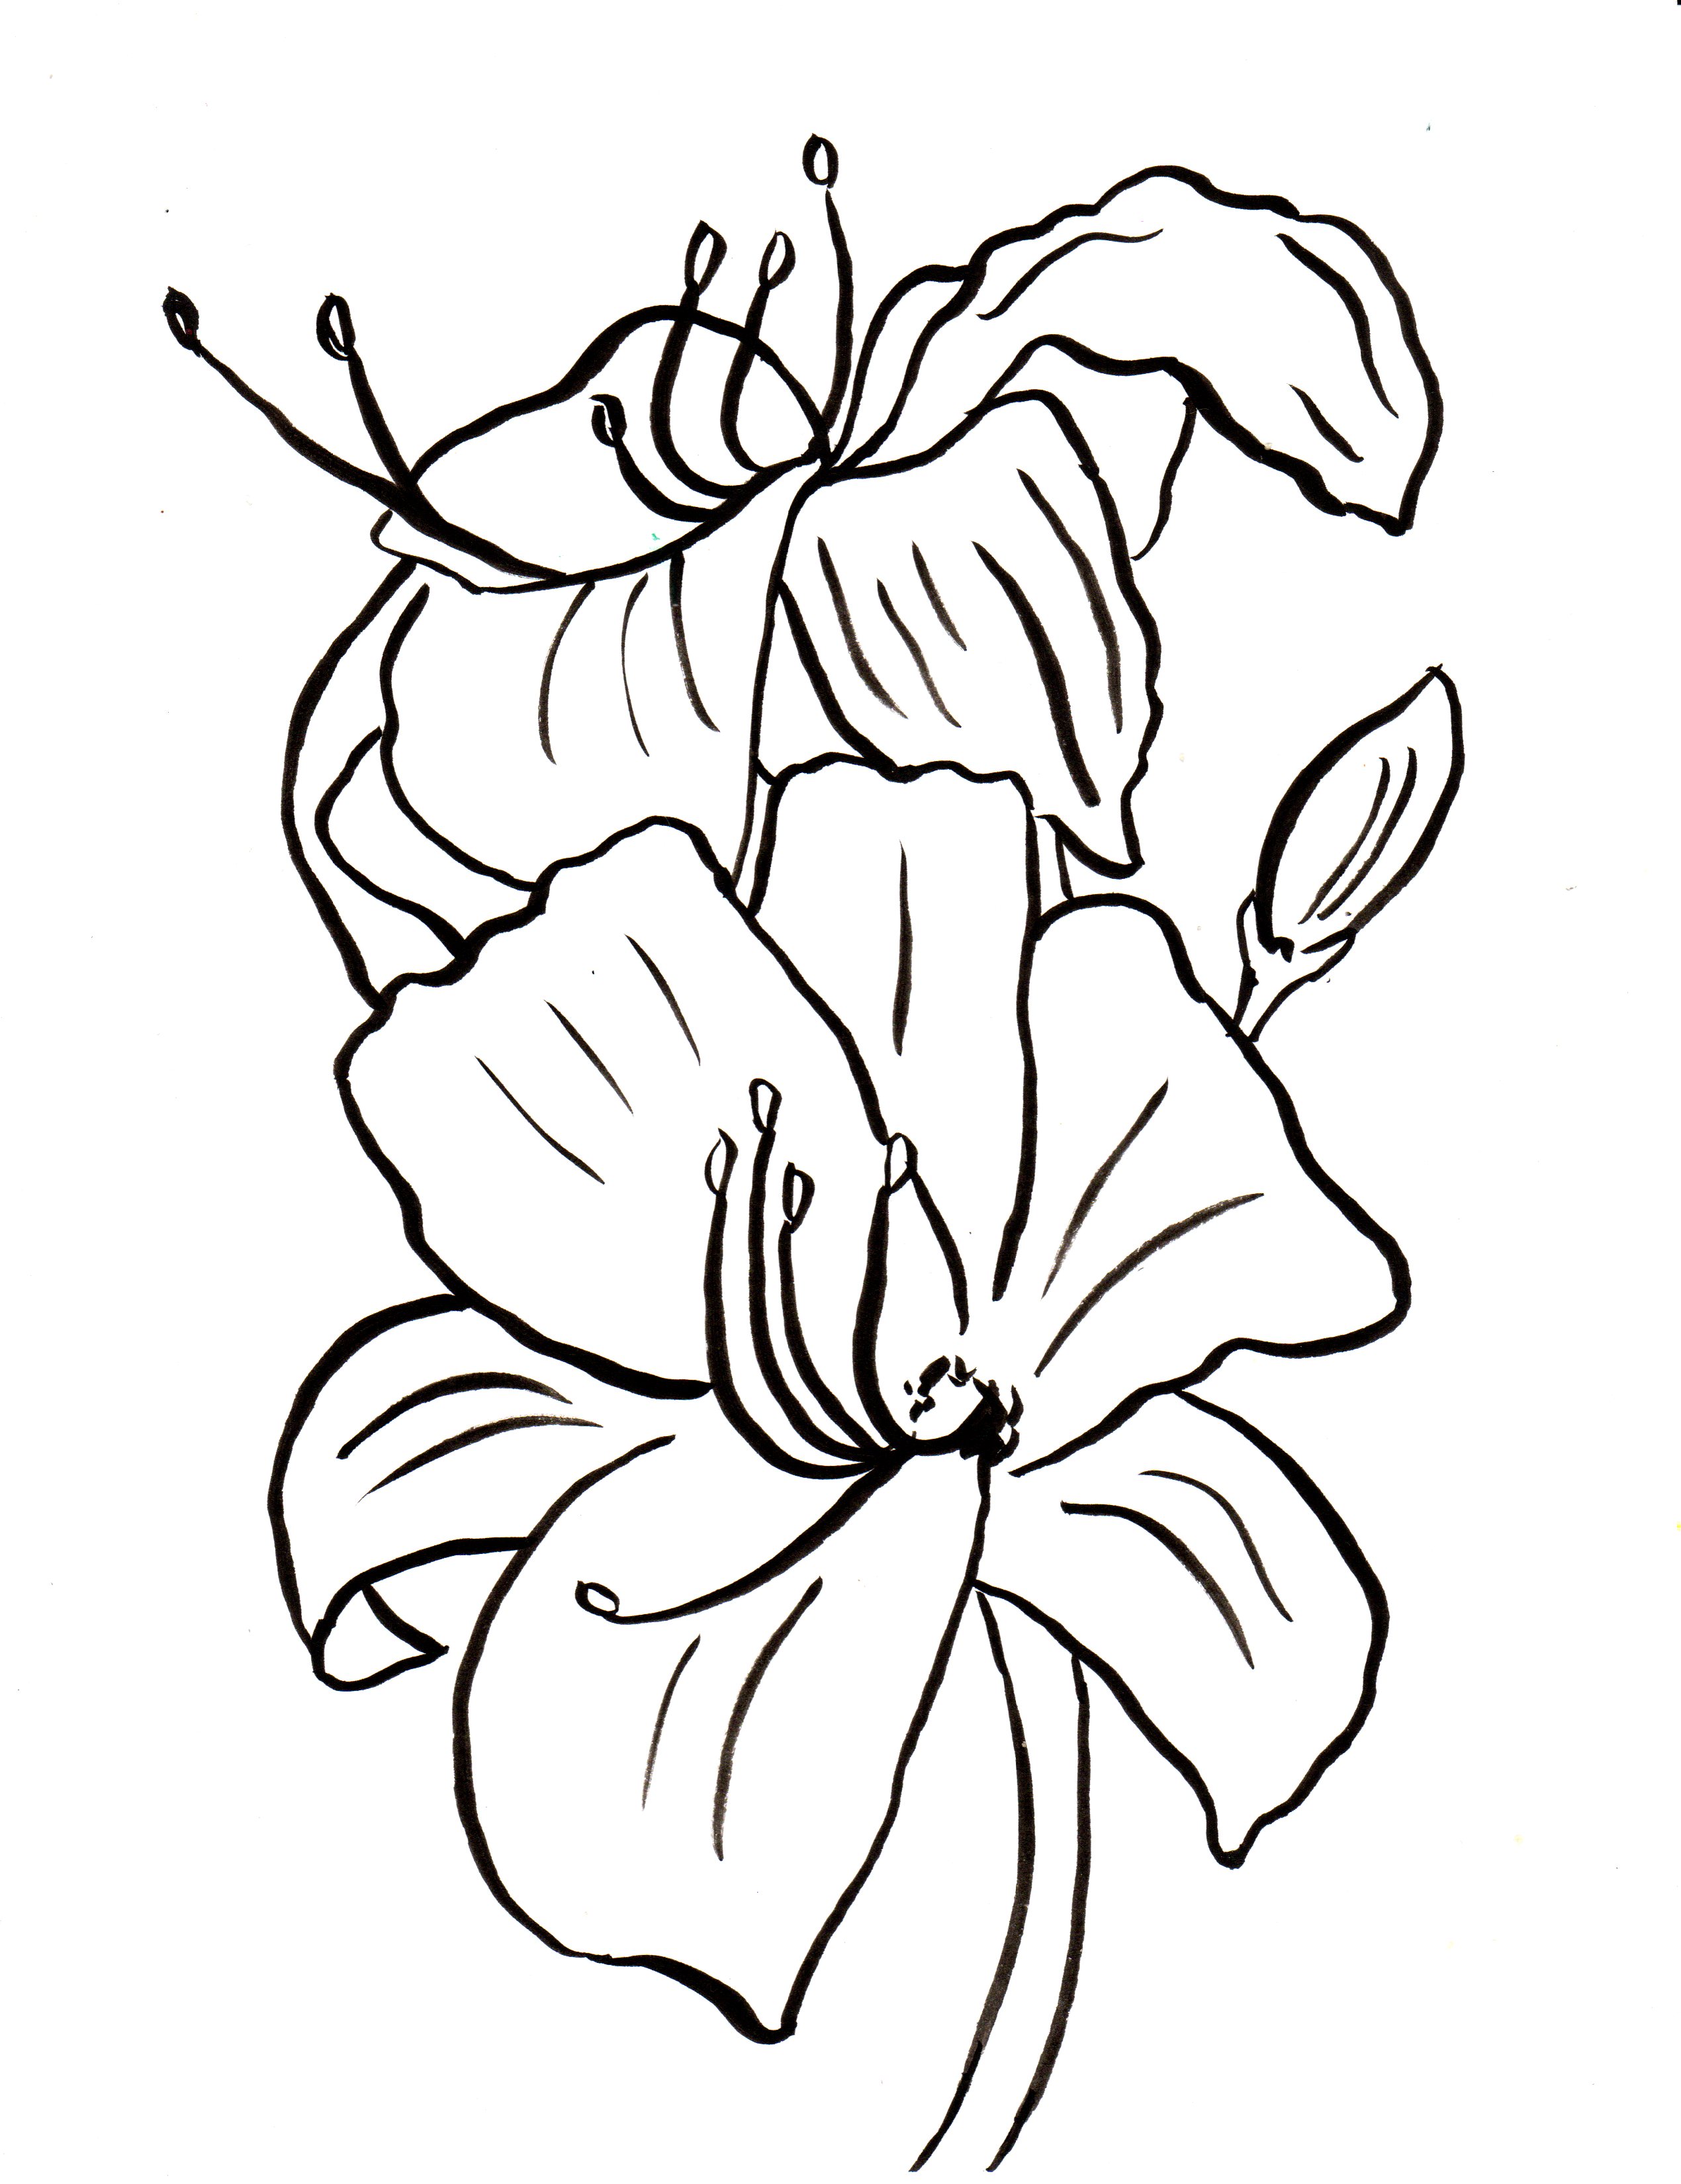 Coloring pages of lilies